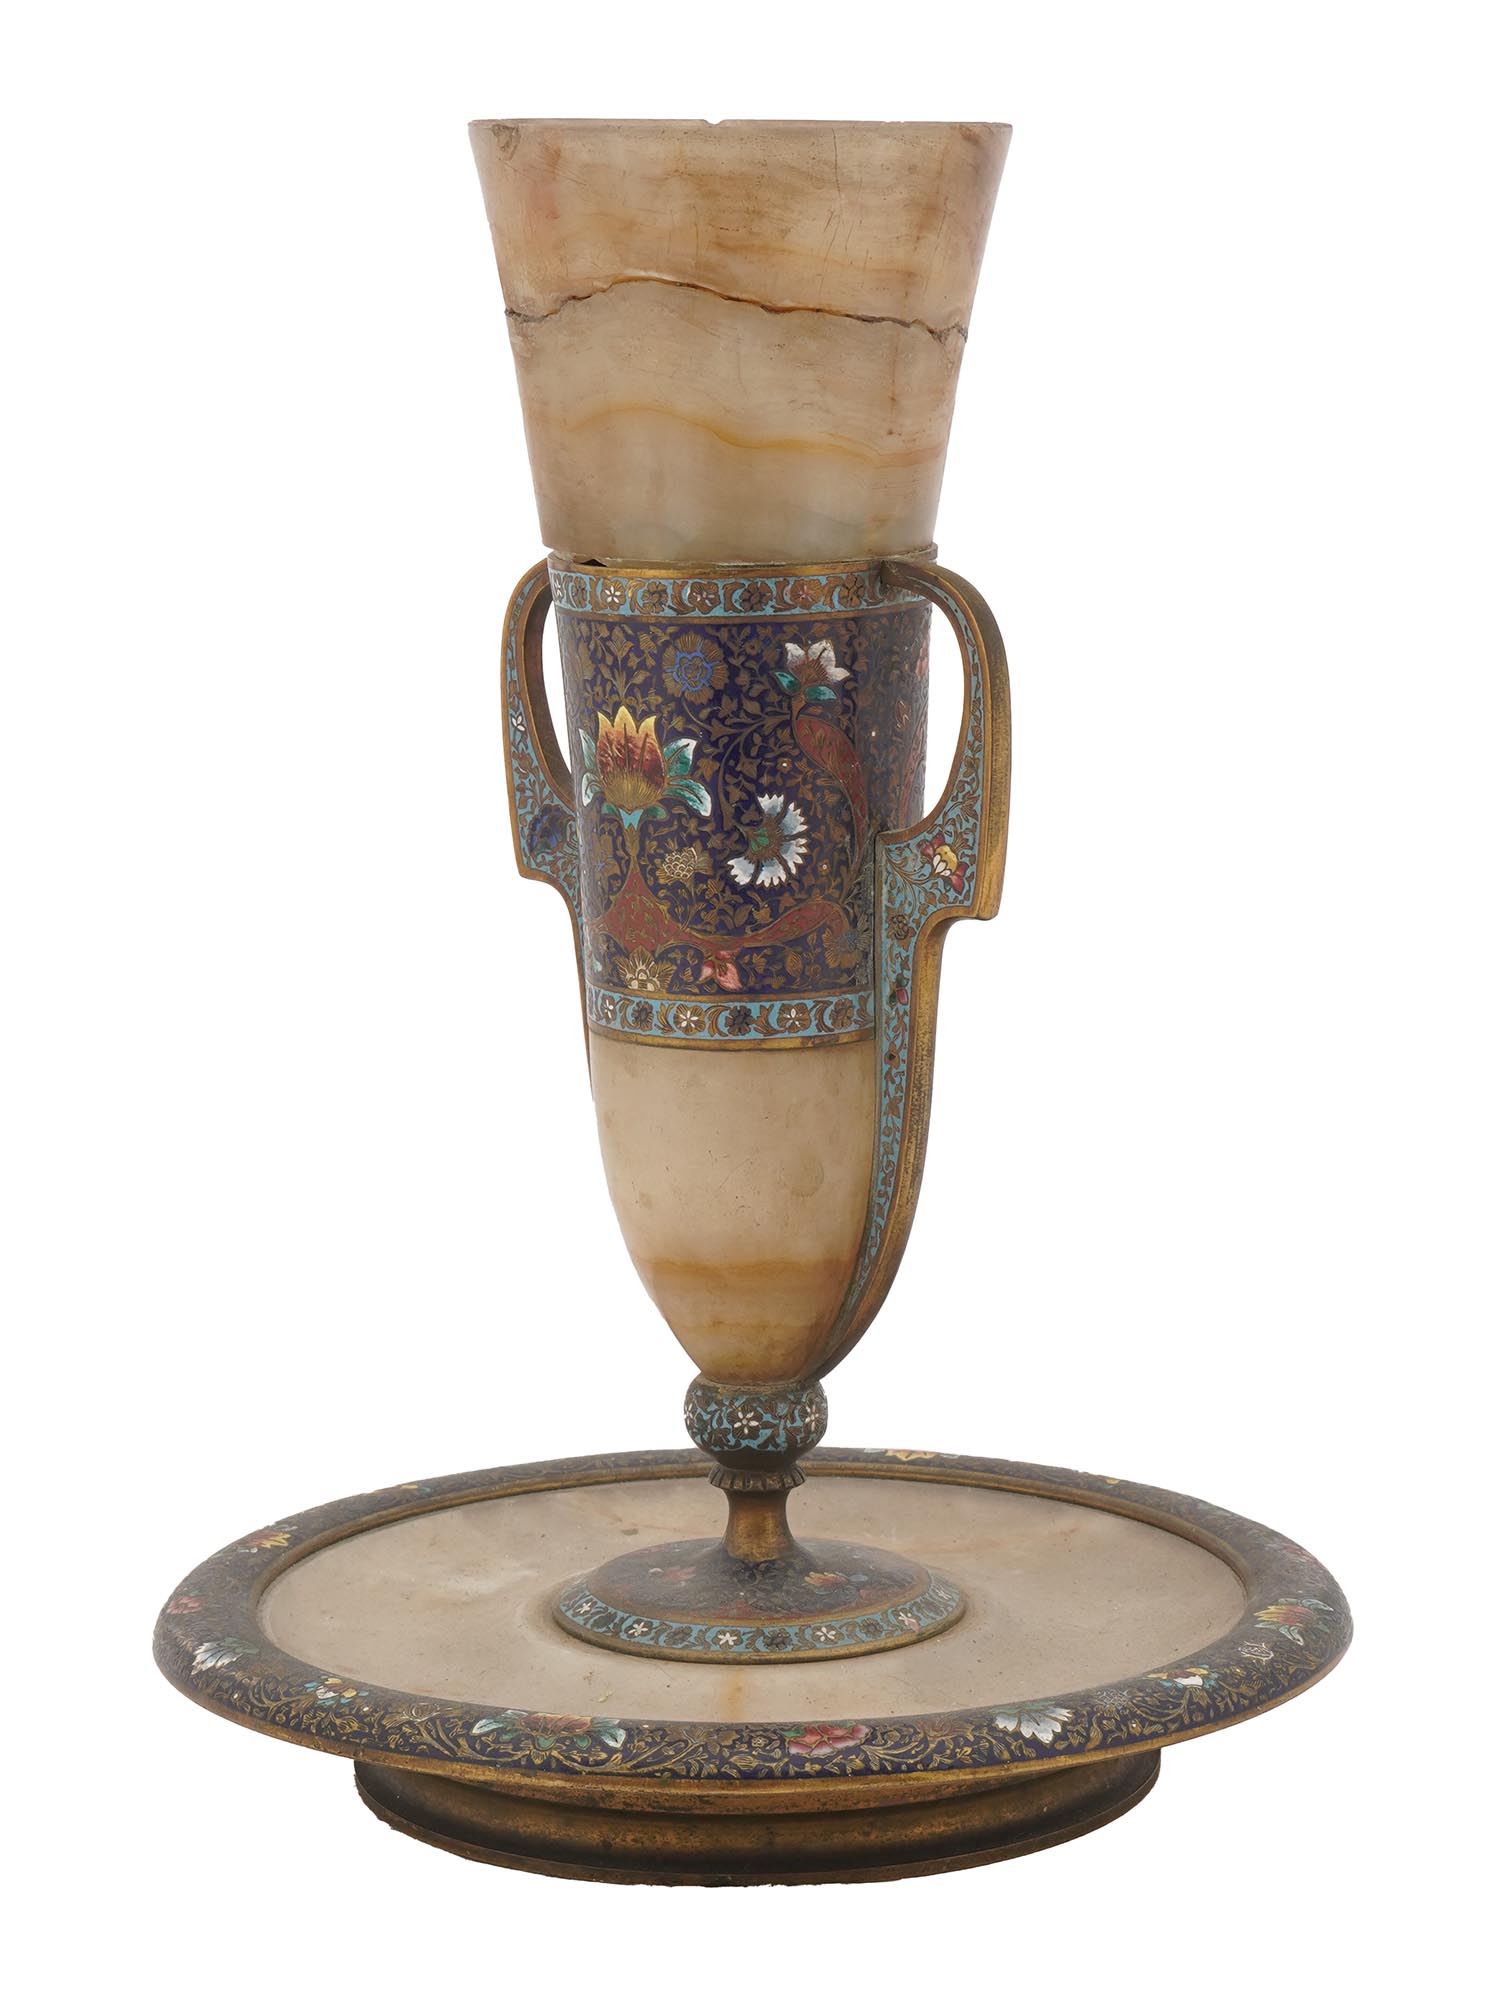 FRENCH CLOISONNE ENAMEL ONYX KIDDUSH CUP W STAND PIC-1